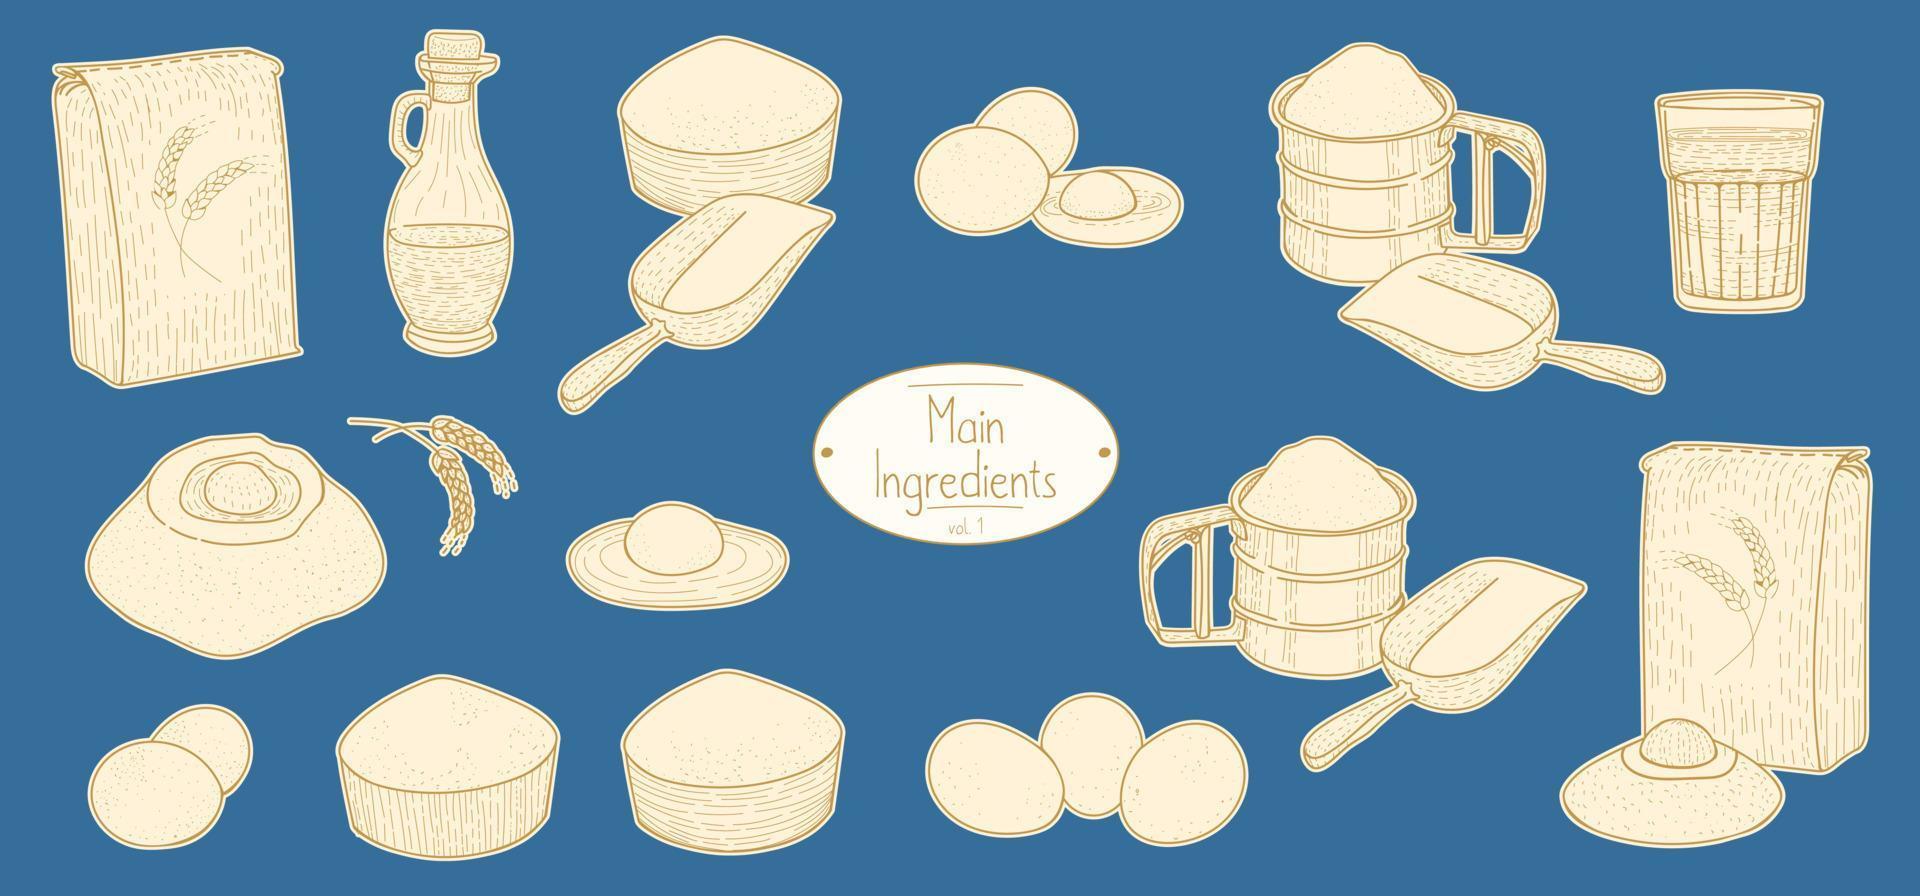 Main ingredients for italian food Pasta recipe, sketching illustration in retro style vector